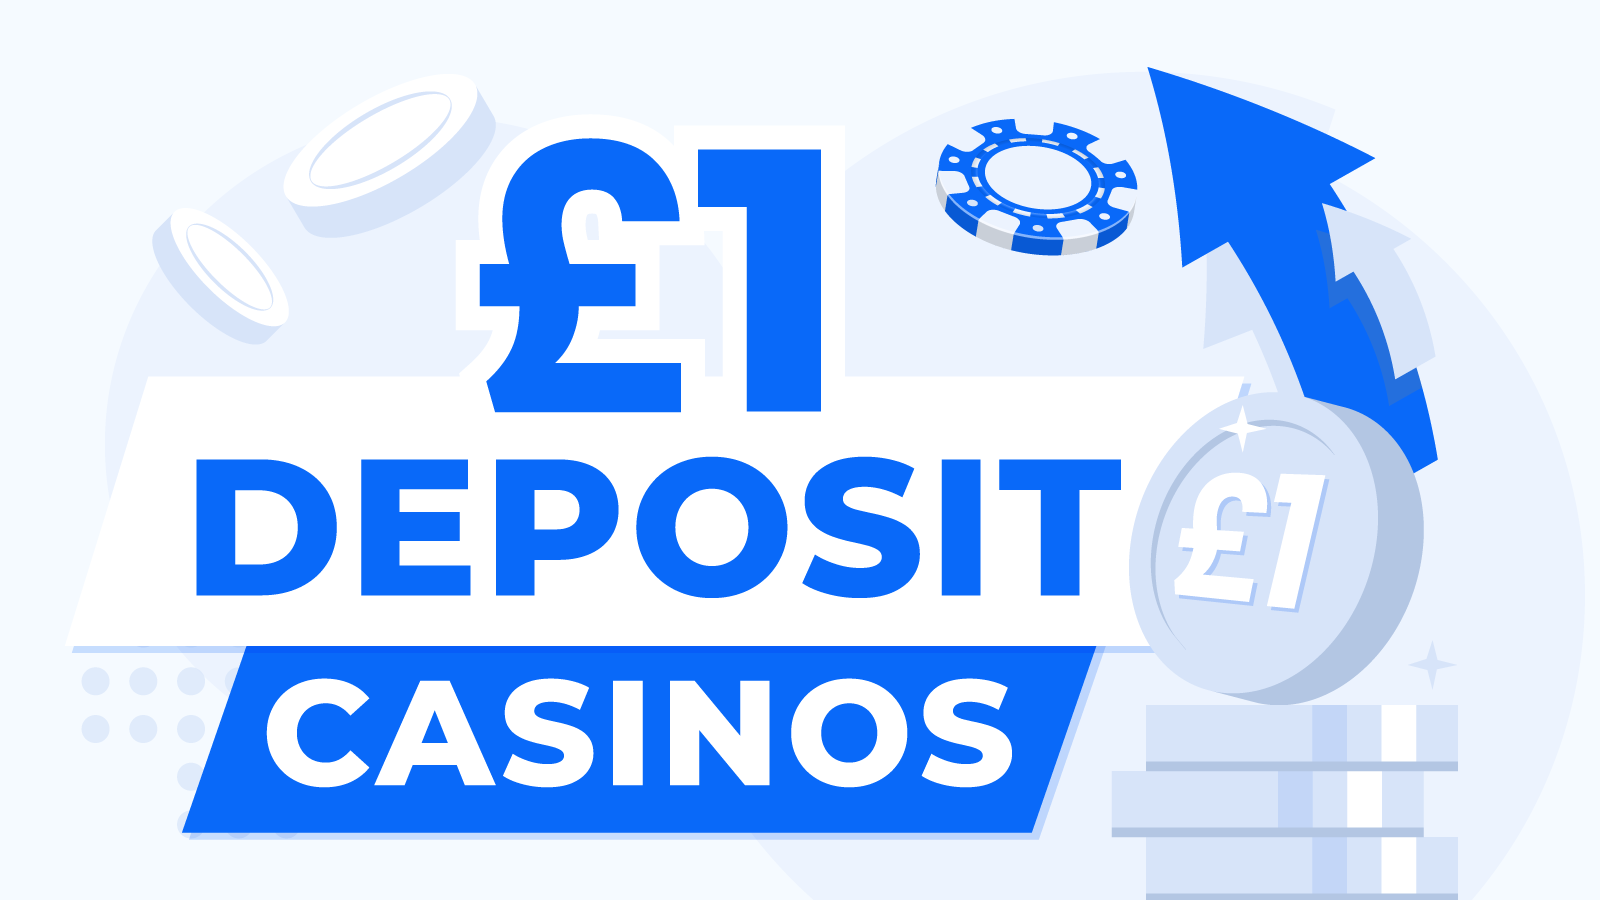 free spins on first deposit